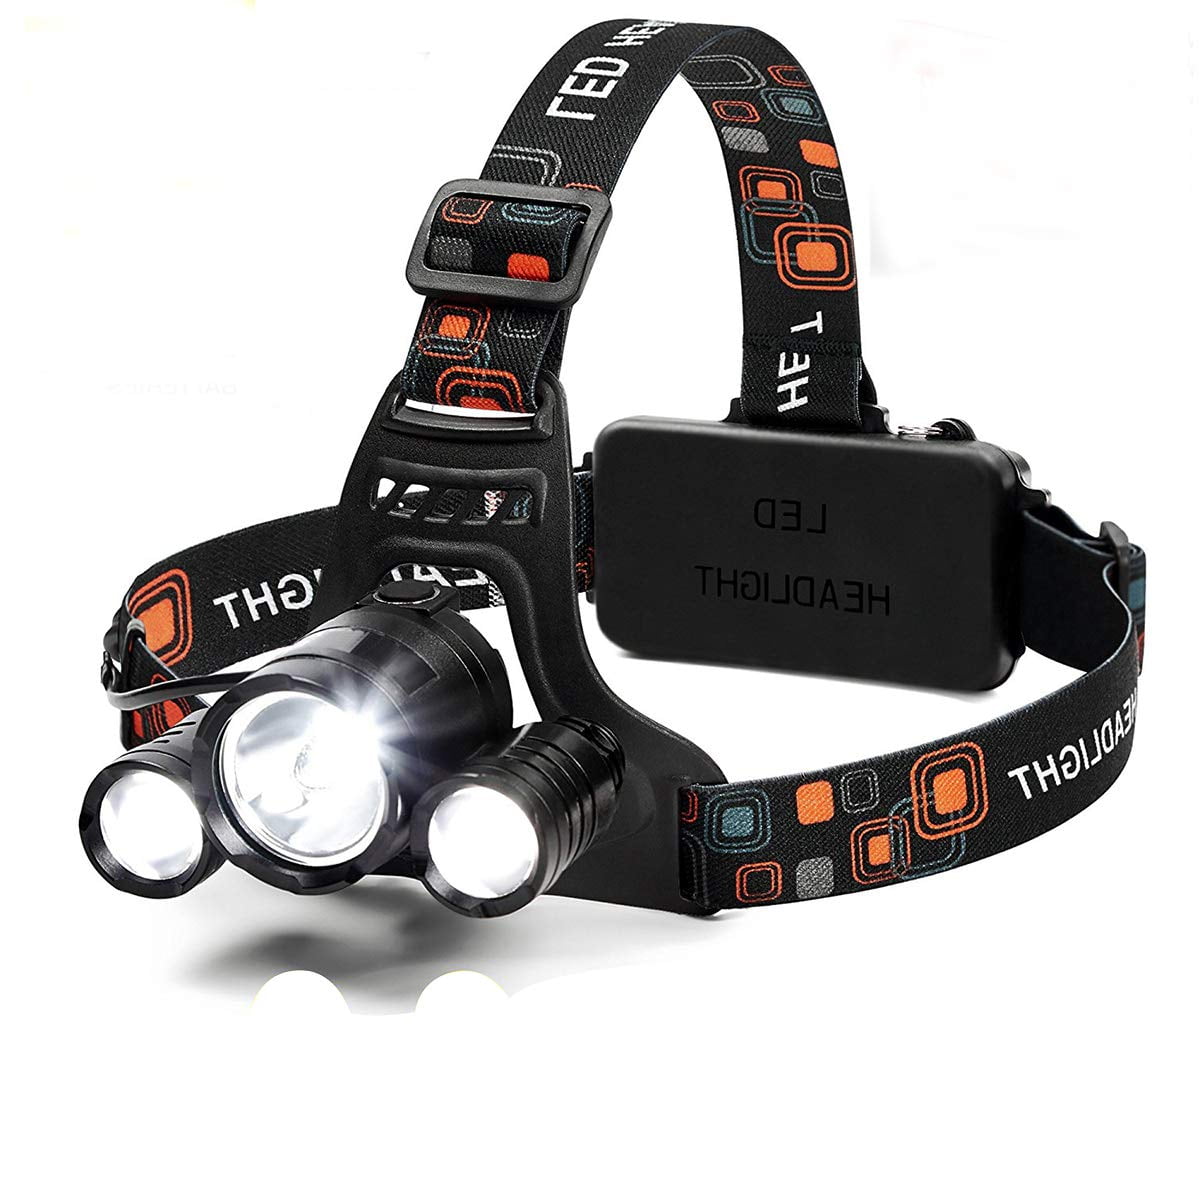 Super Bright LED Headlamp Rechargeable Headlight 5000 Lumens for Hunting 2 Mode for sale online 